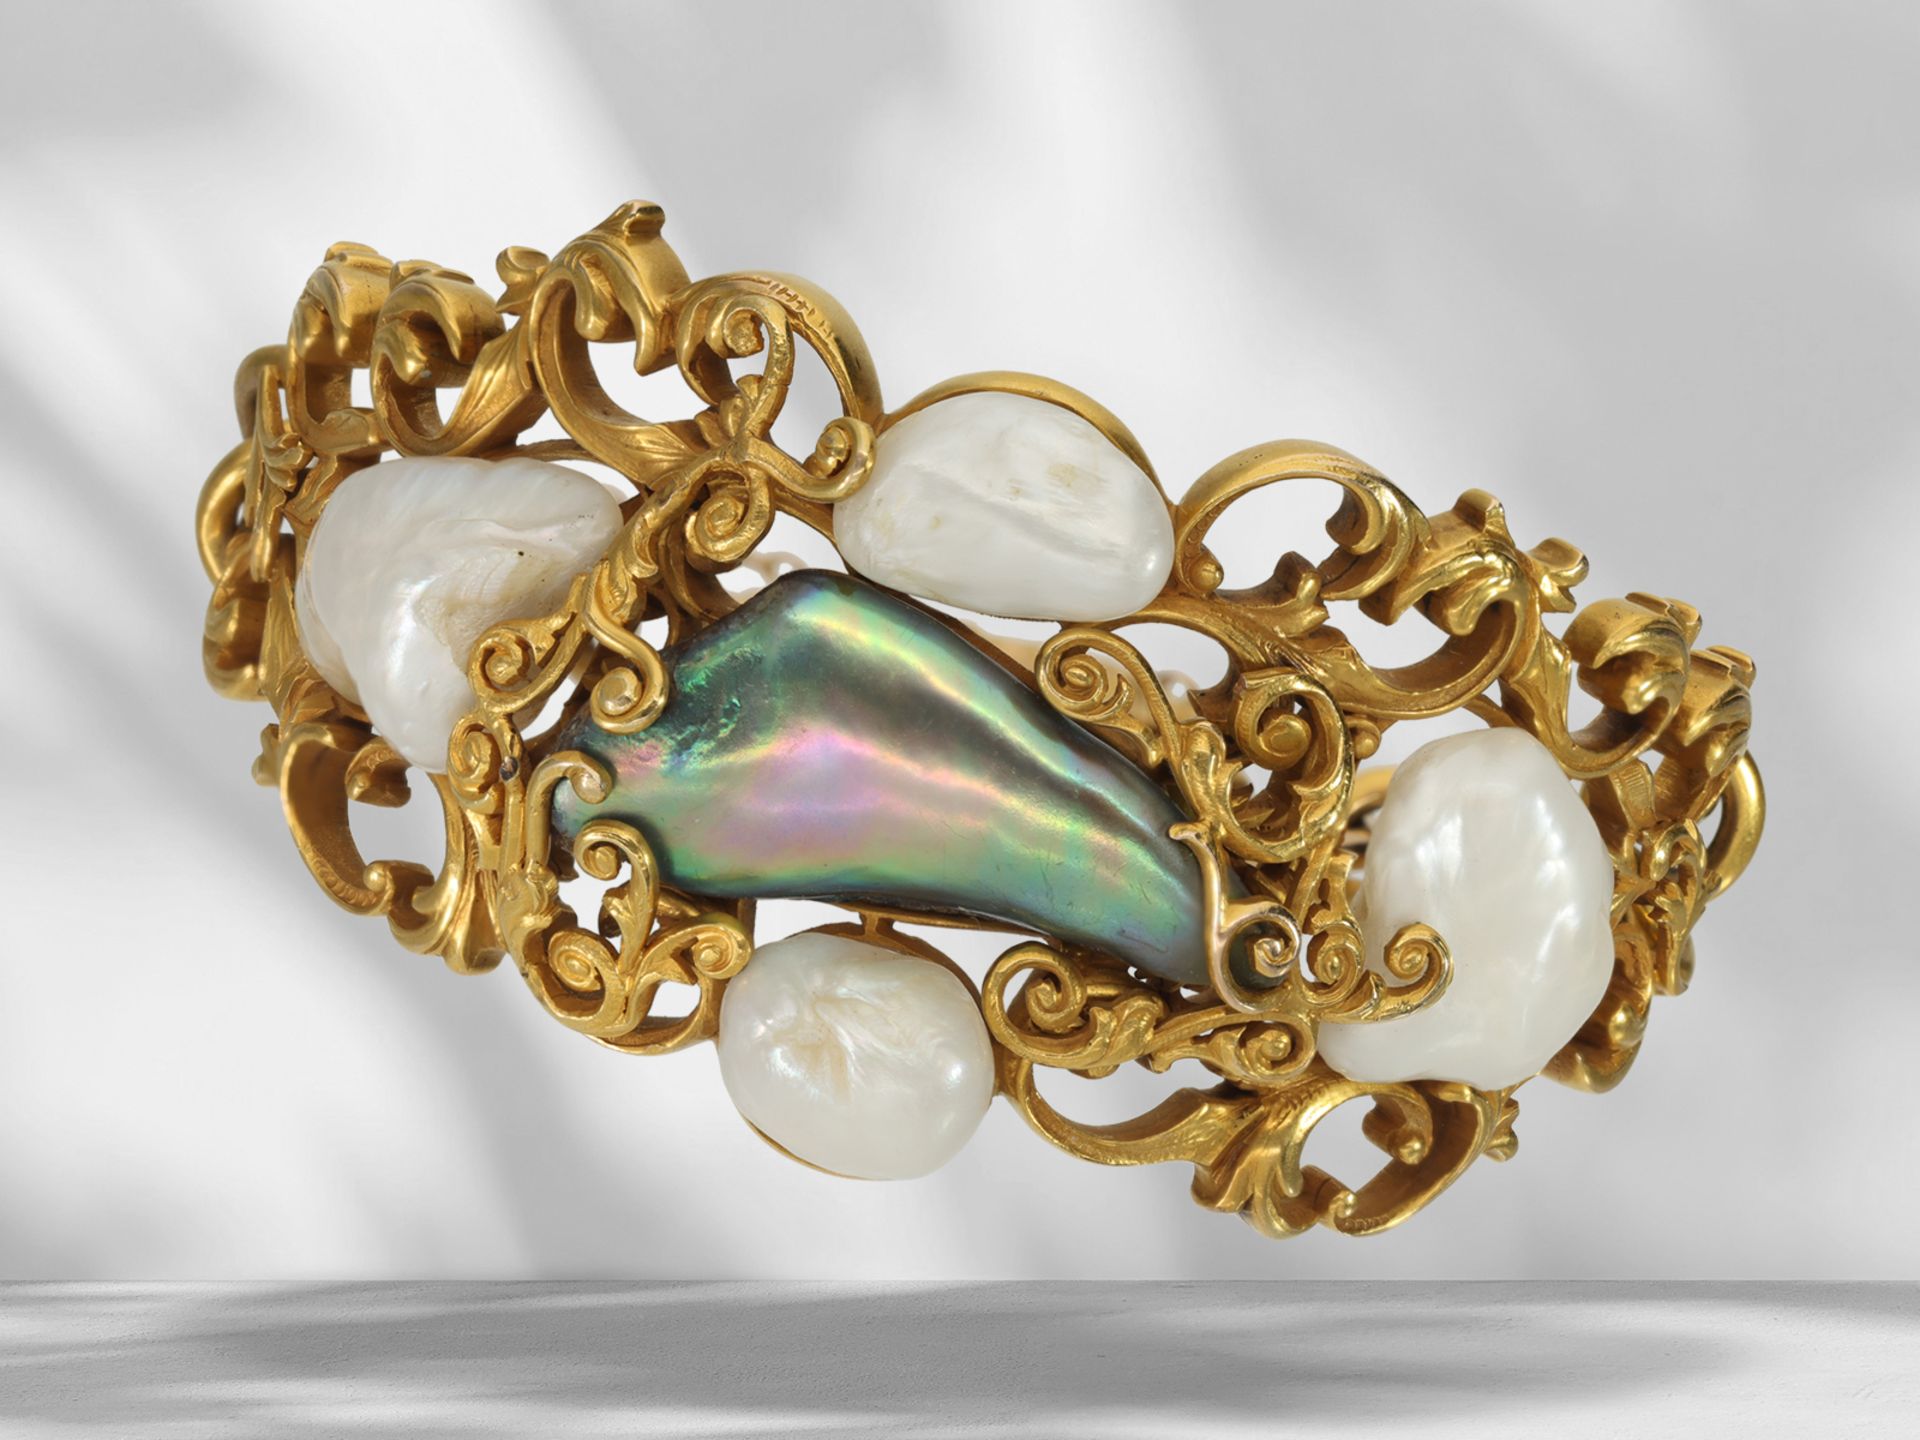 Bracelet: interesting and very unusual antique bracelet/bangle with rare baroque pearls, around 1900